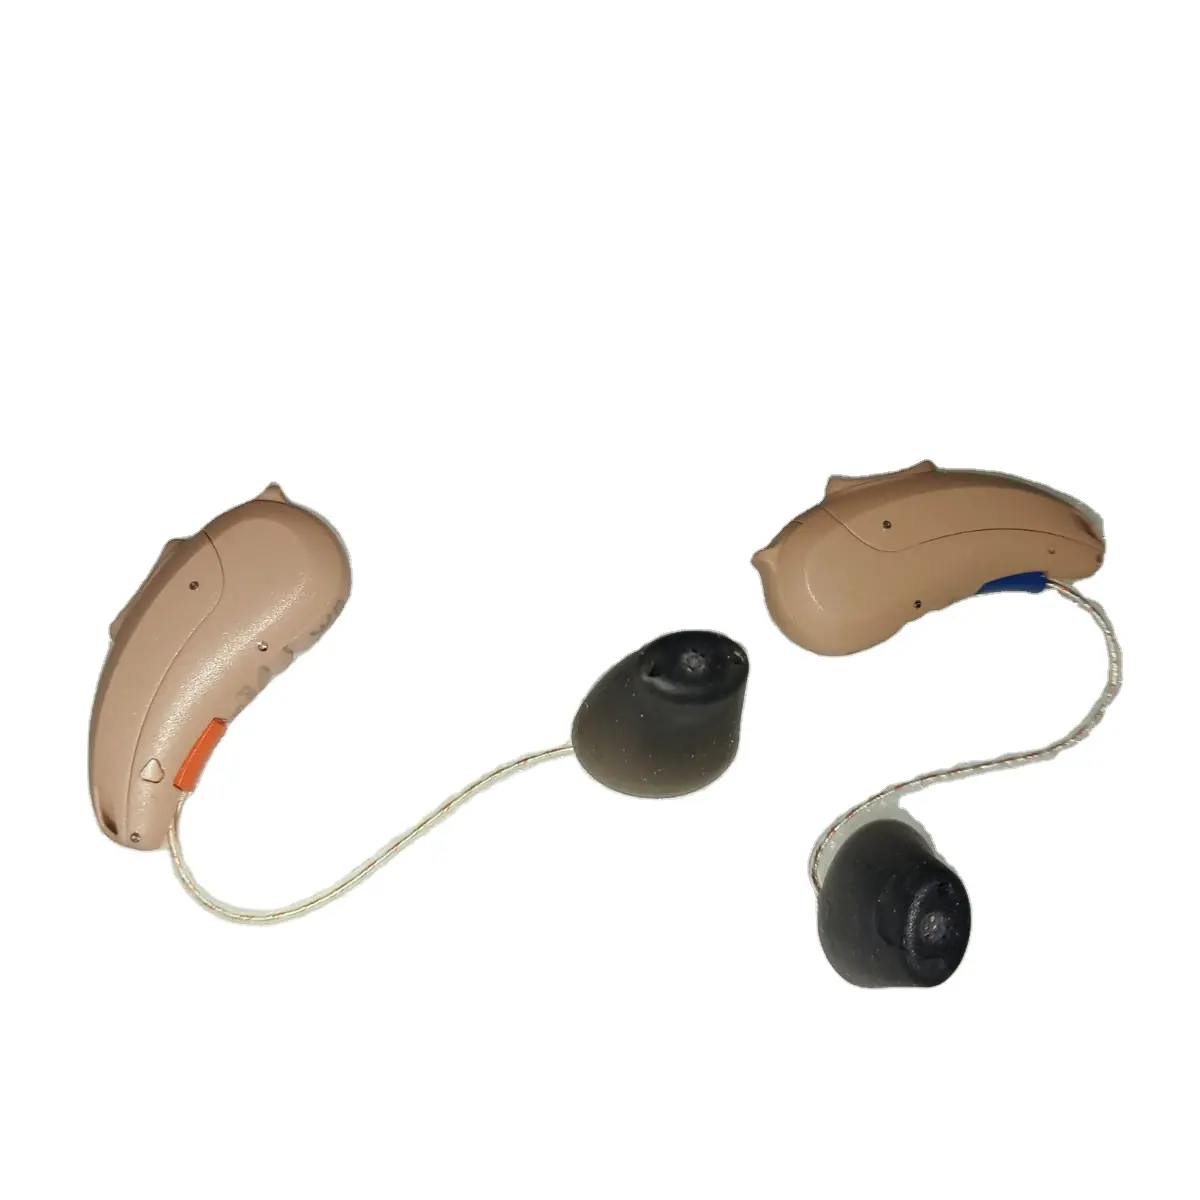 Latest Wholesale Price Hearing Aid Audio Service MOOD 3 G4 RIC 12 Channel Receiver in Canal Hearing Aid for Hear Disable Person